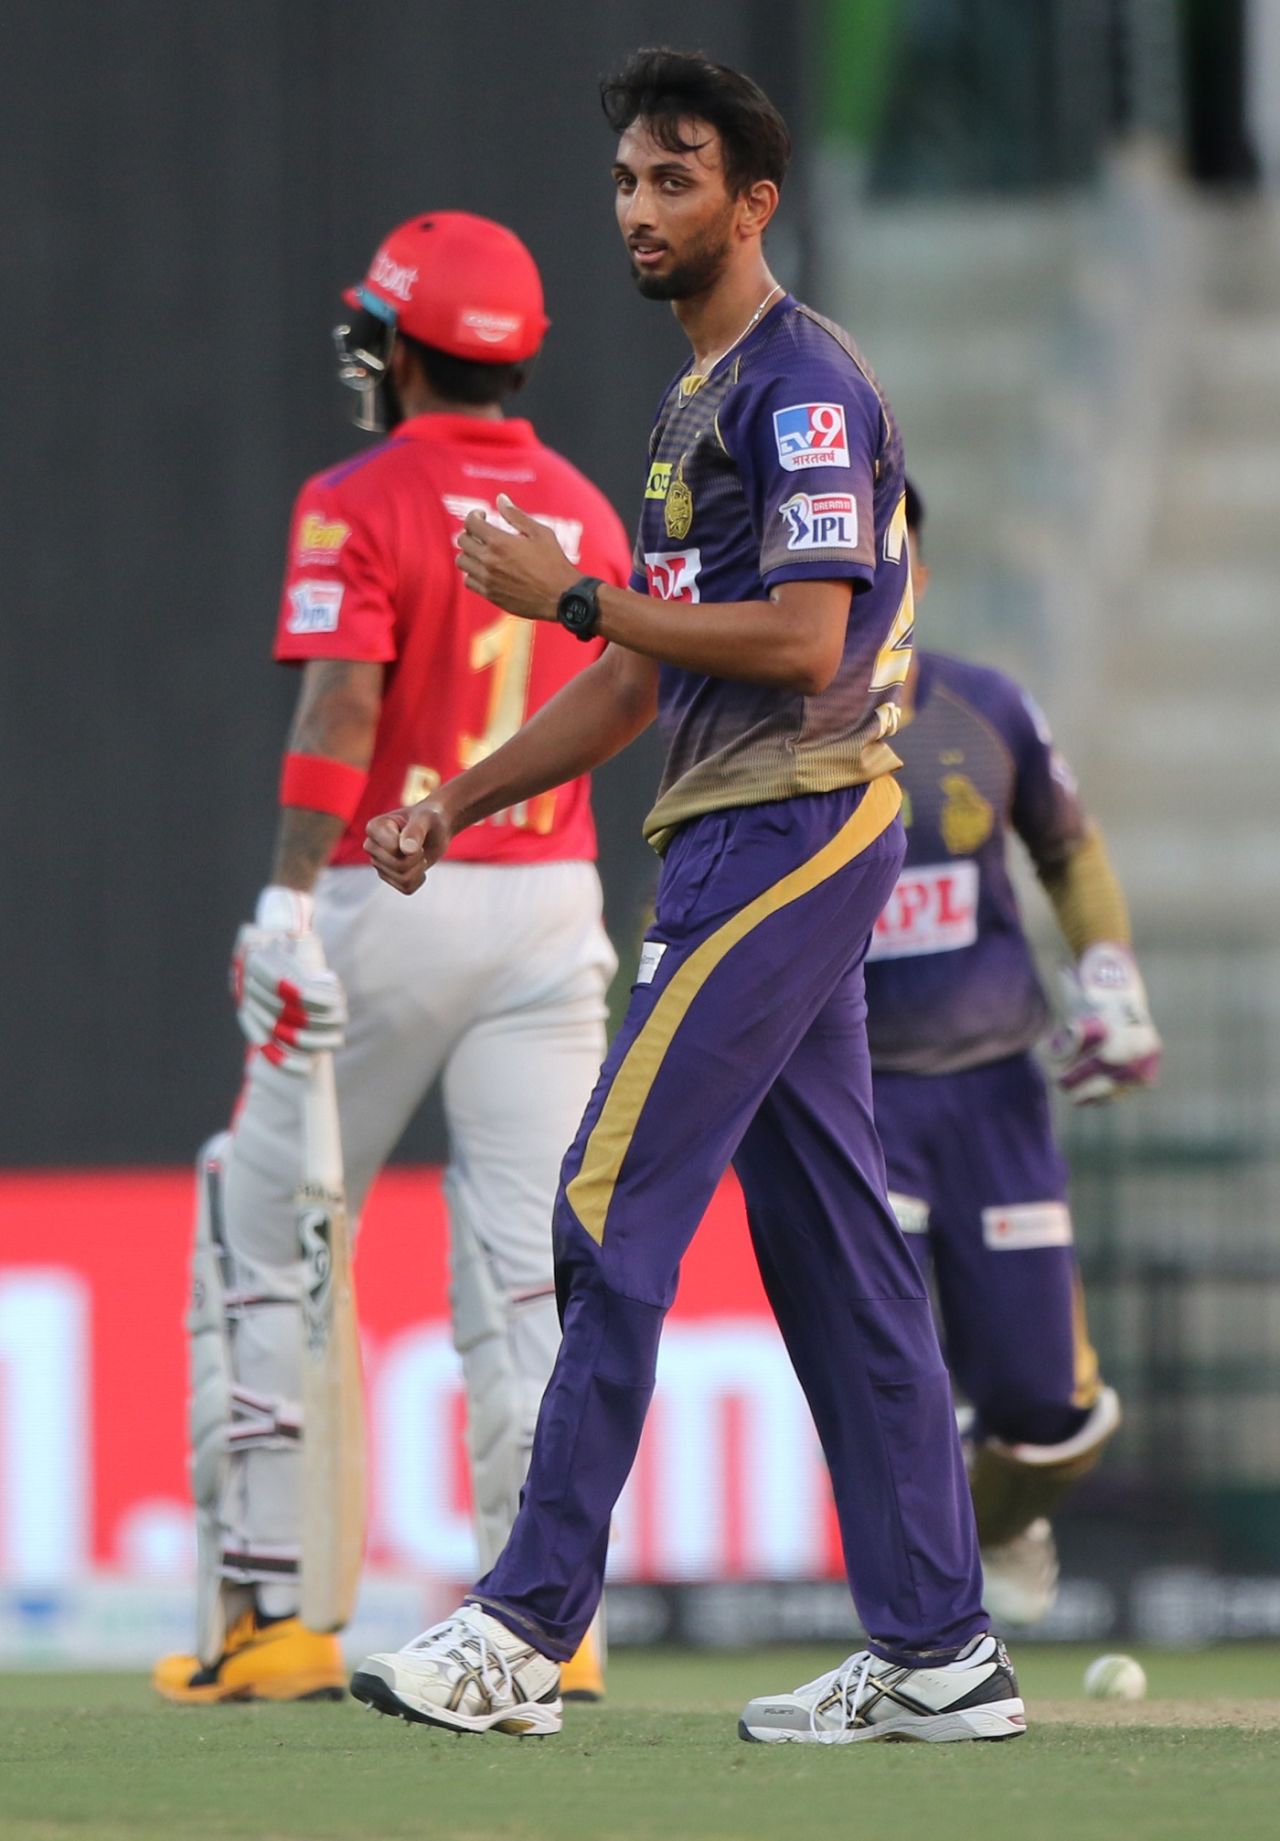 KL Rahul was dismissed at a most inopportune time for his team, Kings XI Punjab vs Kolkata Knight Riders, IPL 2020, Abu Dhabi, October 10, 2020